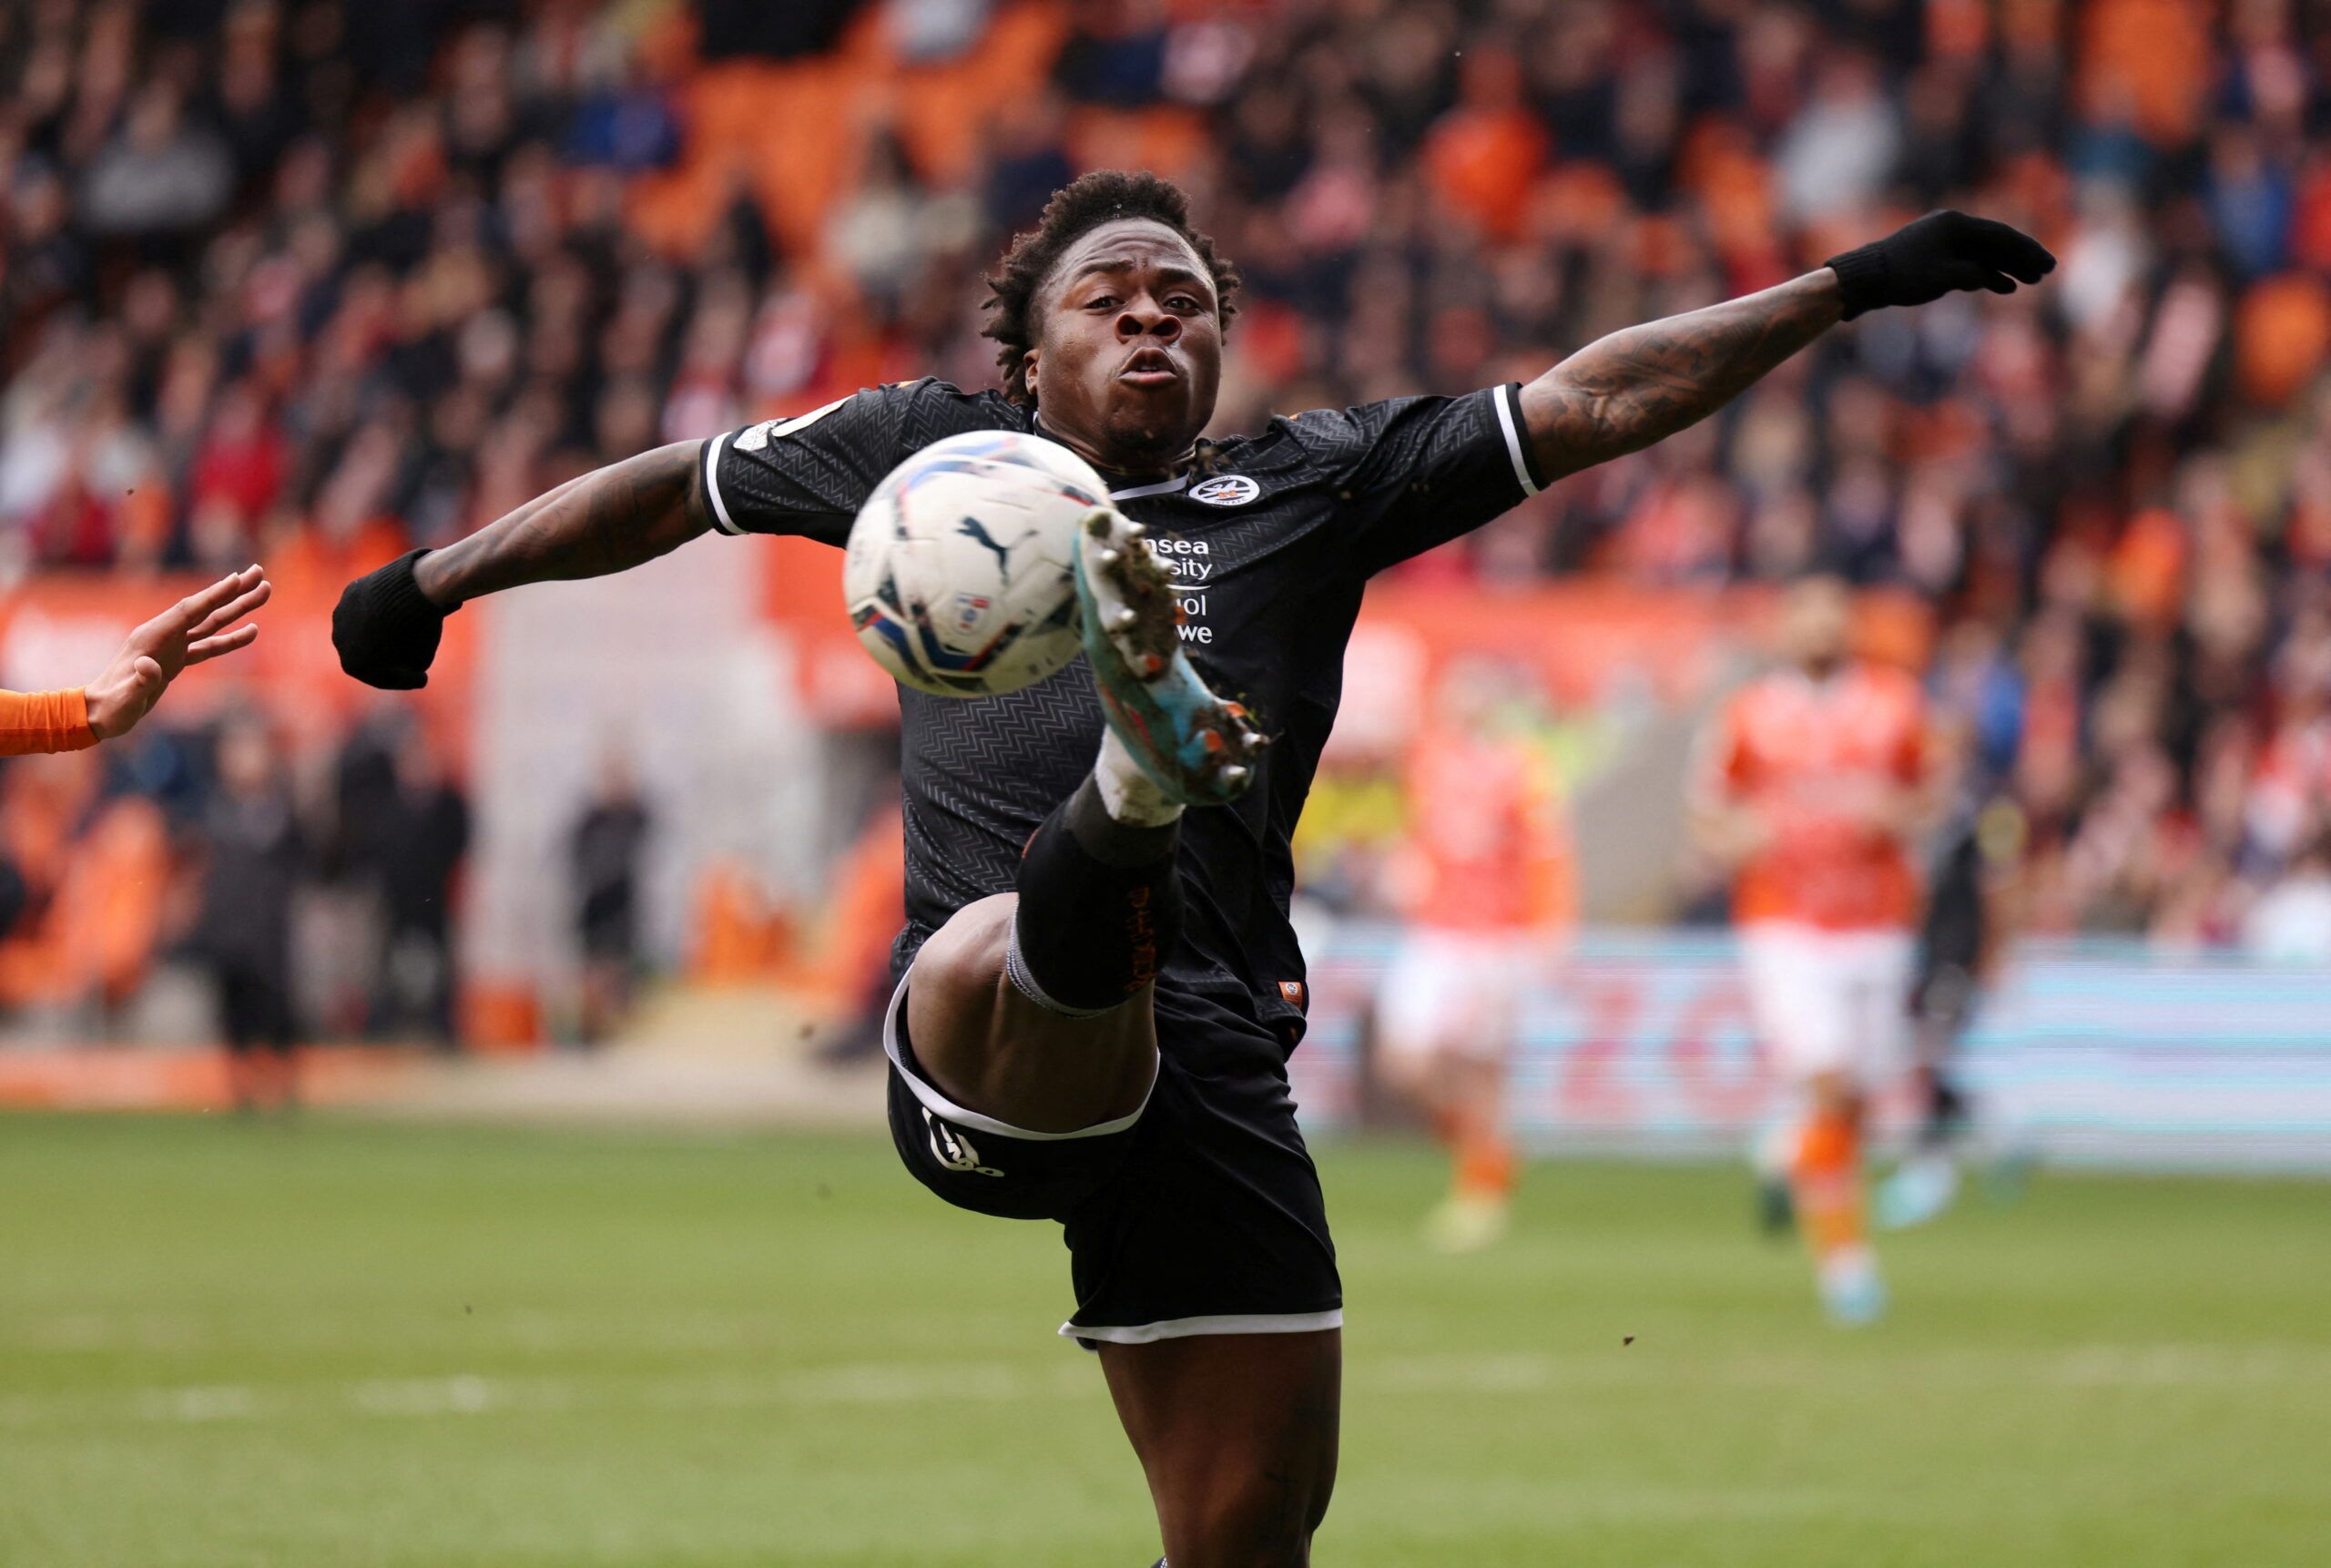 Soccer Football - Championship - Blackpool v Swansea City - Bloomfield Road, Blackpool , Britain - March 12, 2022  Swansea City's Michael Obafemi in action  Action Images/John Clifton  EDITORIAL USE ONLY. No use with unauthorized audio, video, data, fixture lists, club/league logos or 